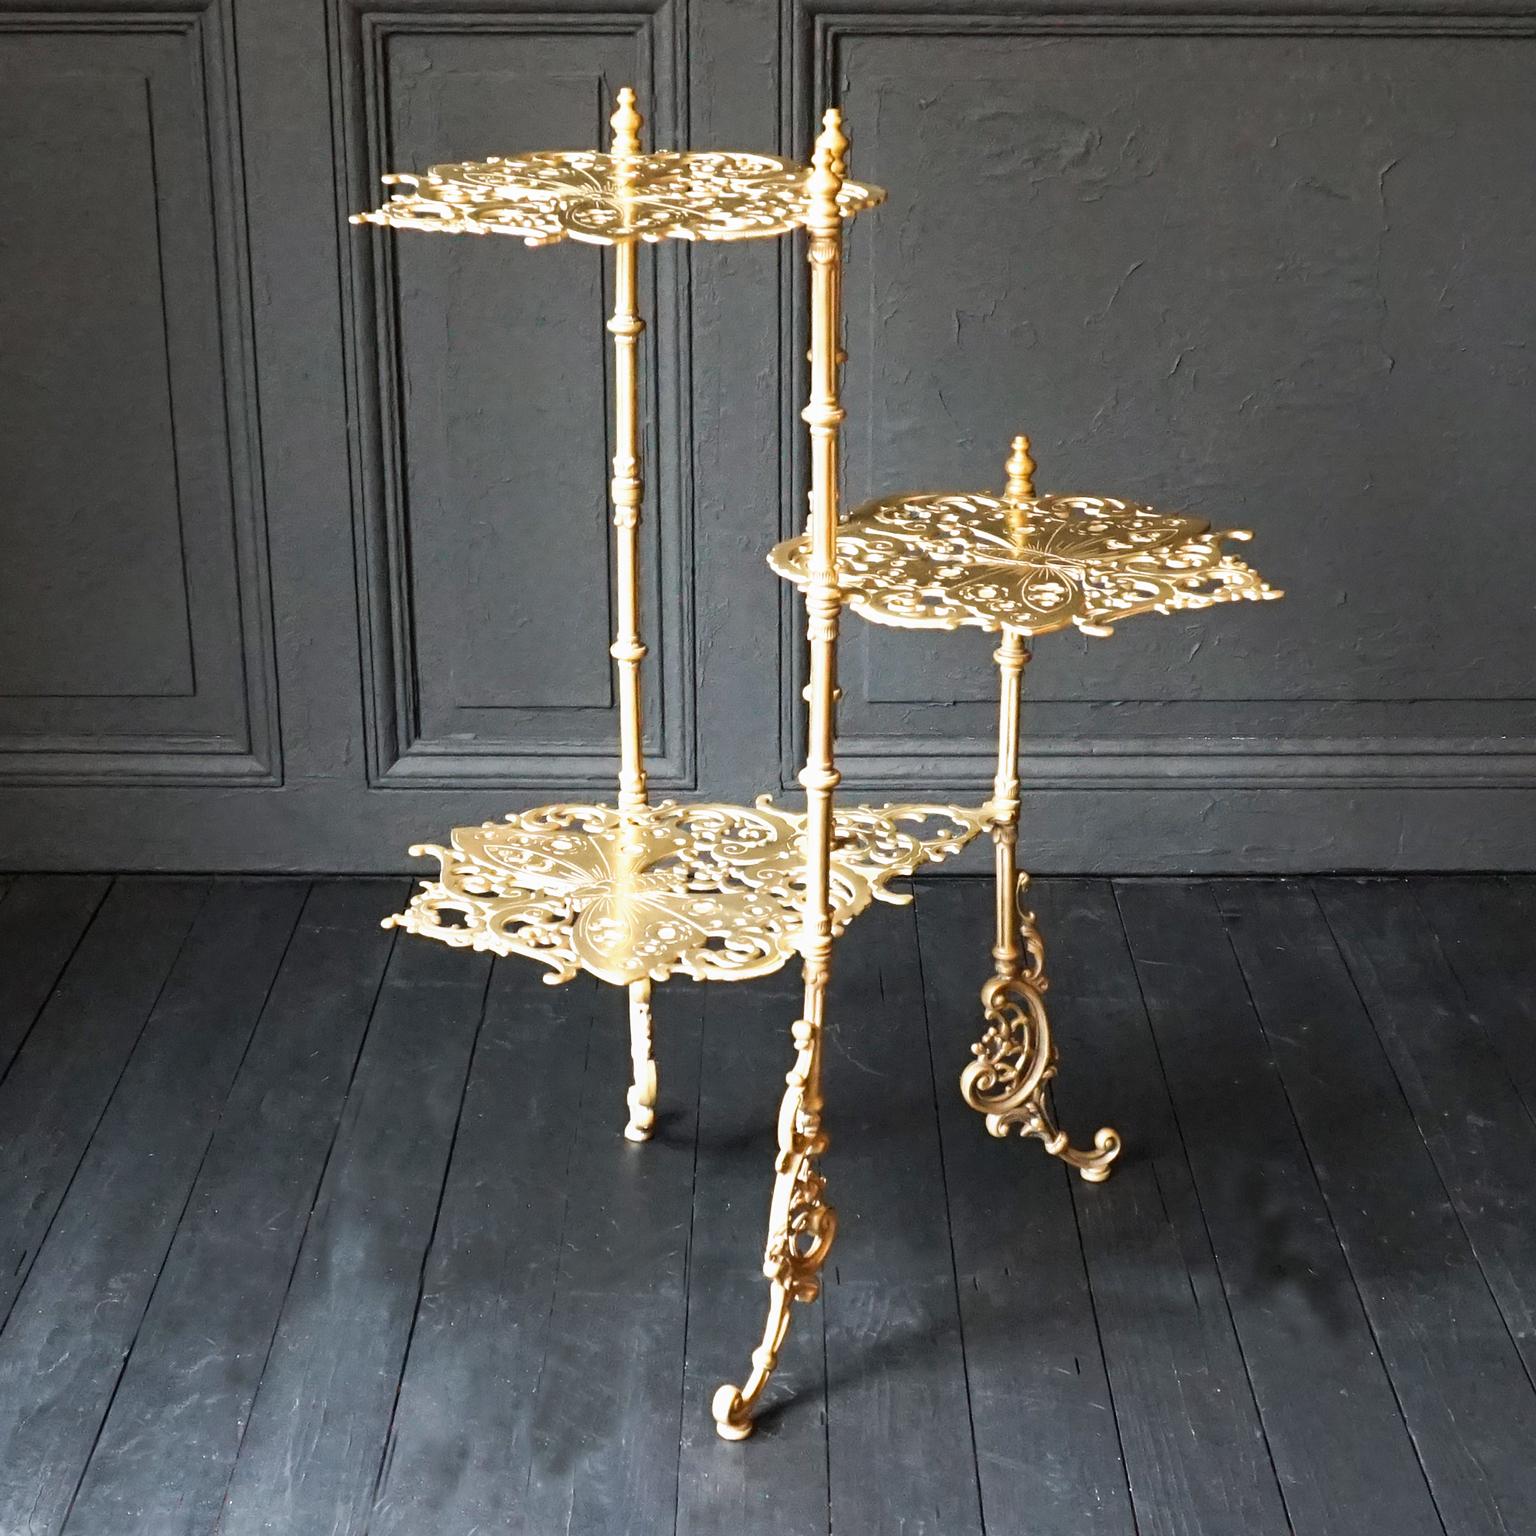 Exceptional Jugendstil 3-tier solid cast brass plant Stand.
Finely detailed in ornate flower theme with butterfly design in the tier platforms. 
This Jugendstil but also very Hollywood Regency style stand will work in any interior. 
Of course it